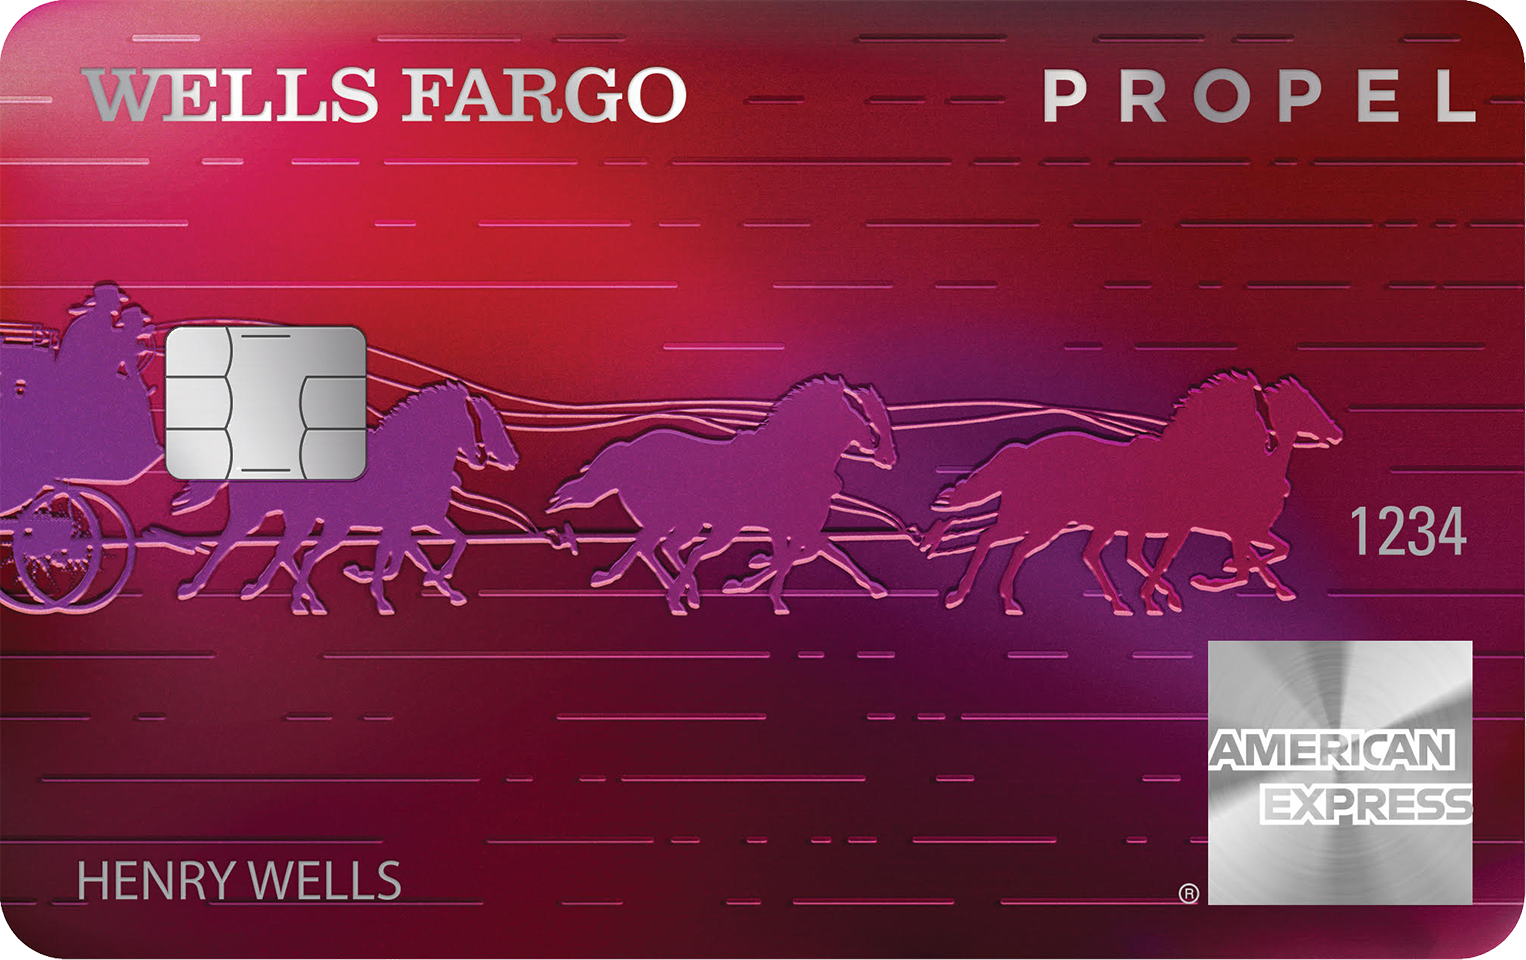 Wells Fargo Credit Cards - Want to Learn How to Apply?